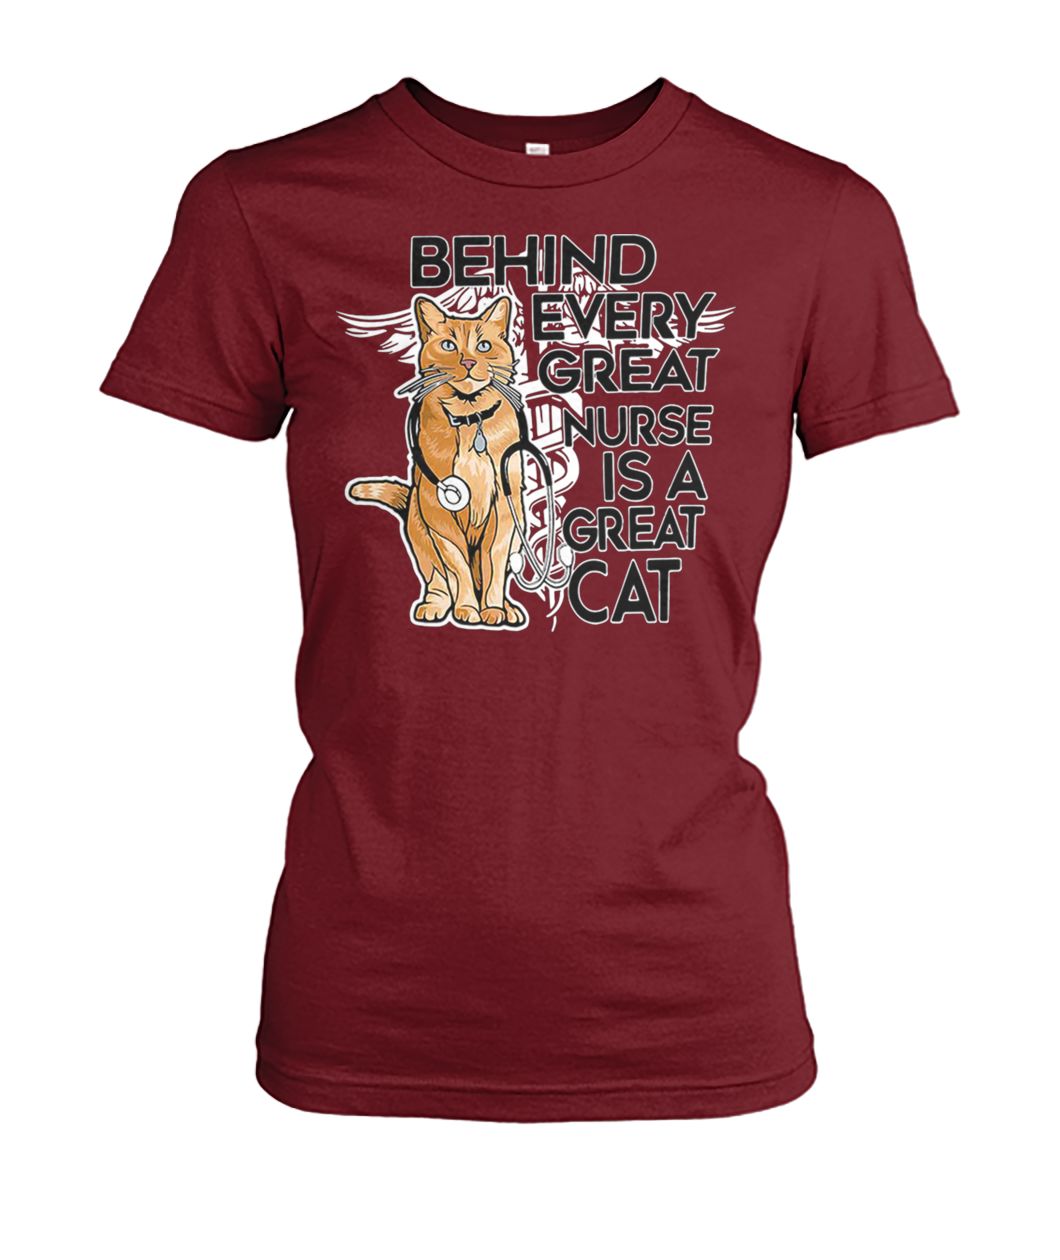 Behind every great nurse is a great captain marvel goose cat women's crew tee